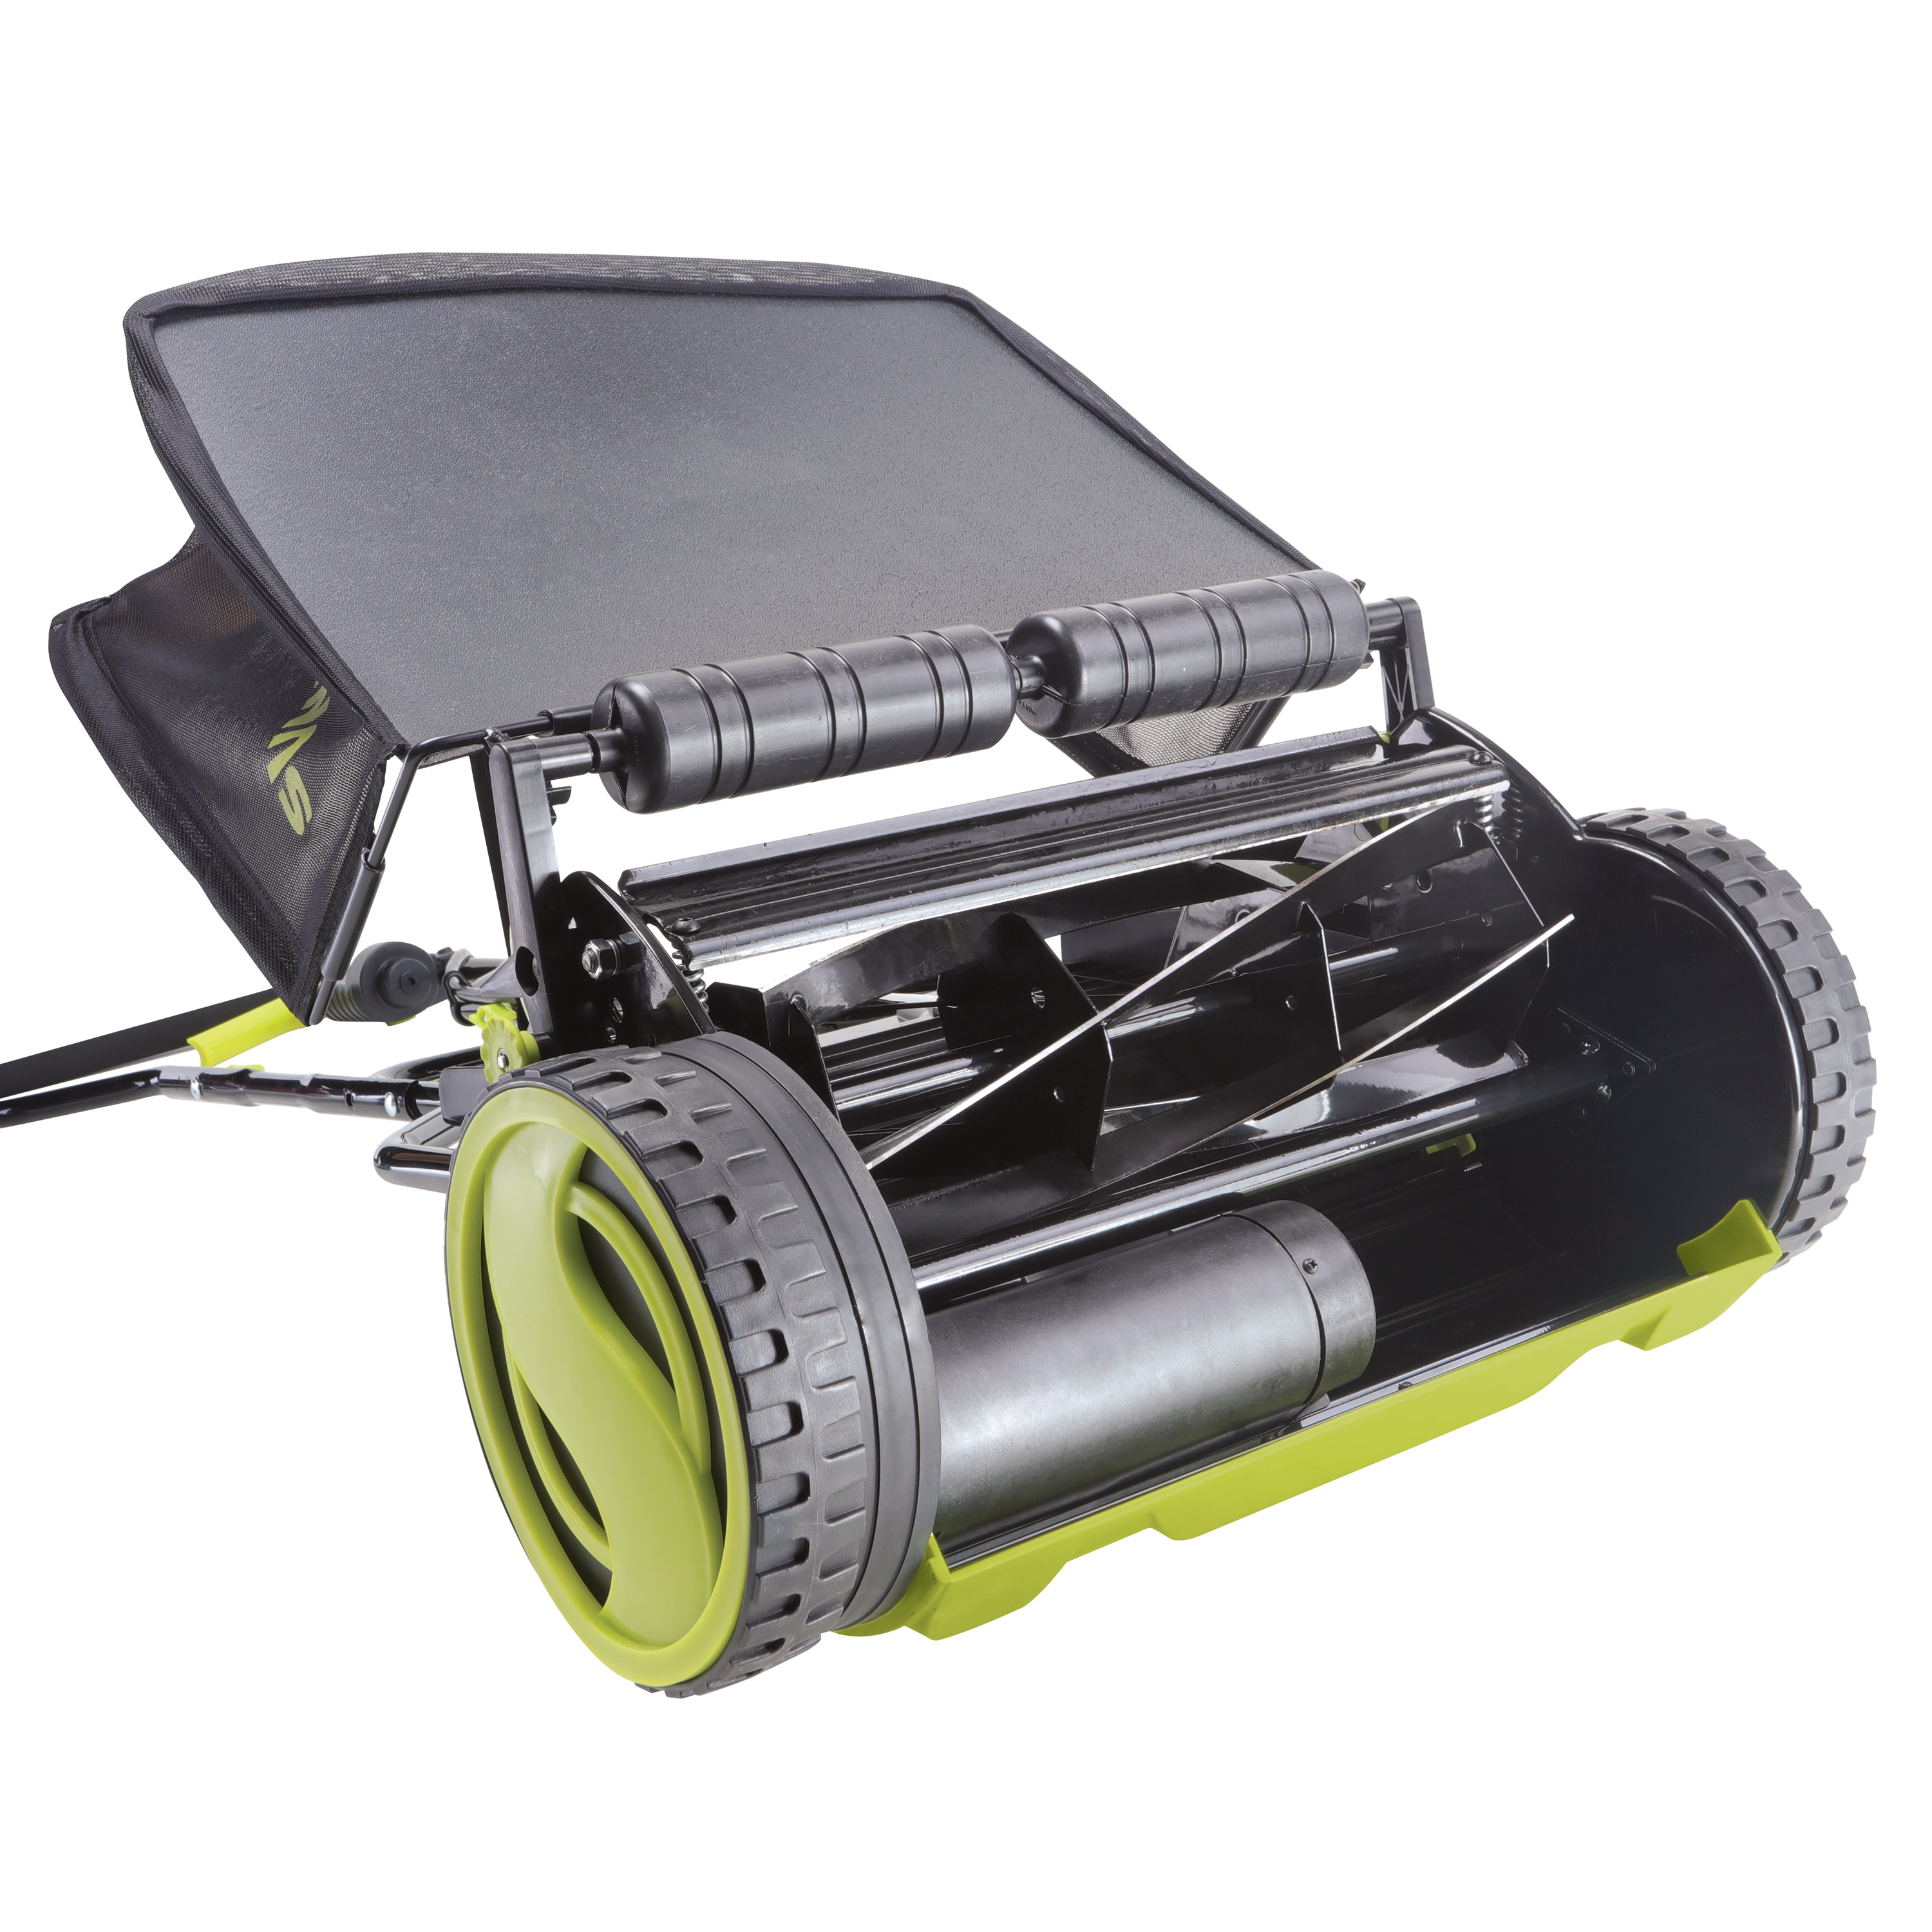 Tool Only Cordless Push Reel Mower w/Rear Collection Bag Sun Joe 24V-CRLM15-CT 24-Volt iON Battery + Charger Not Included